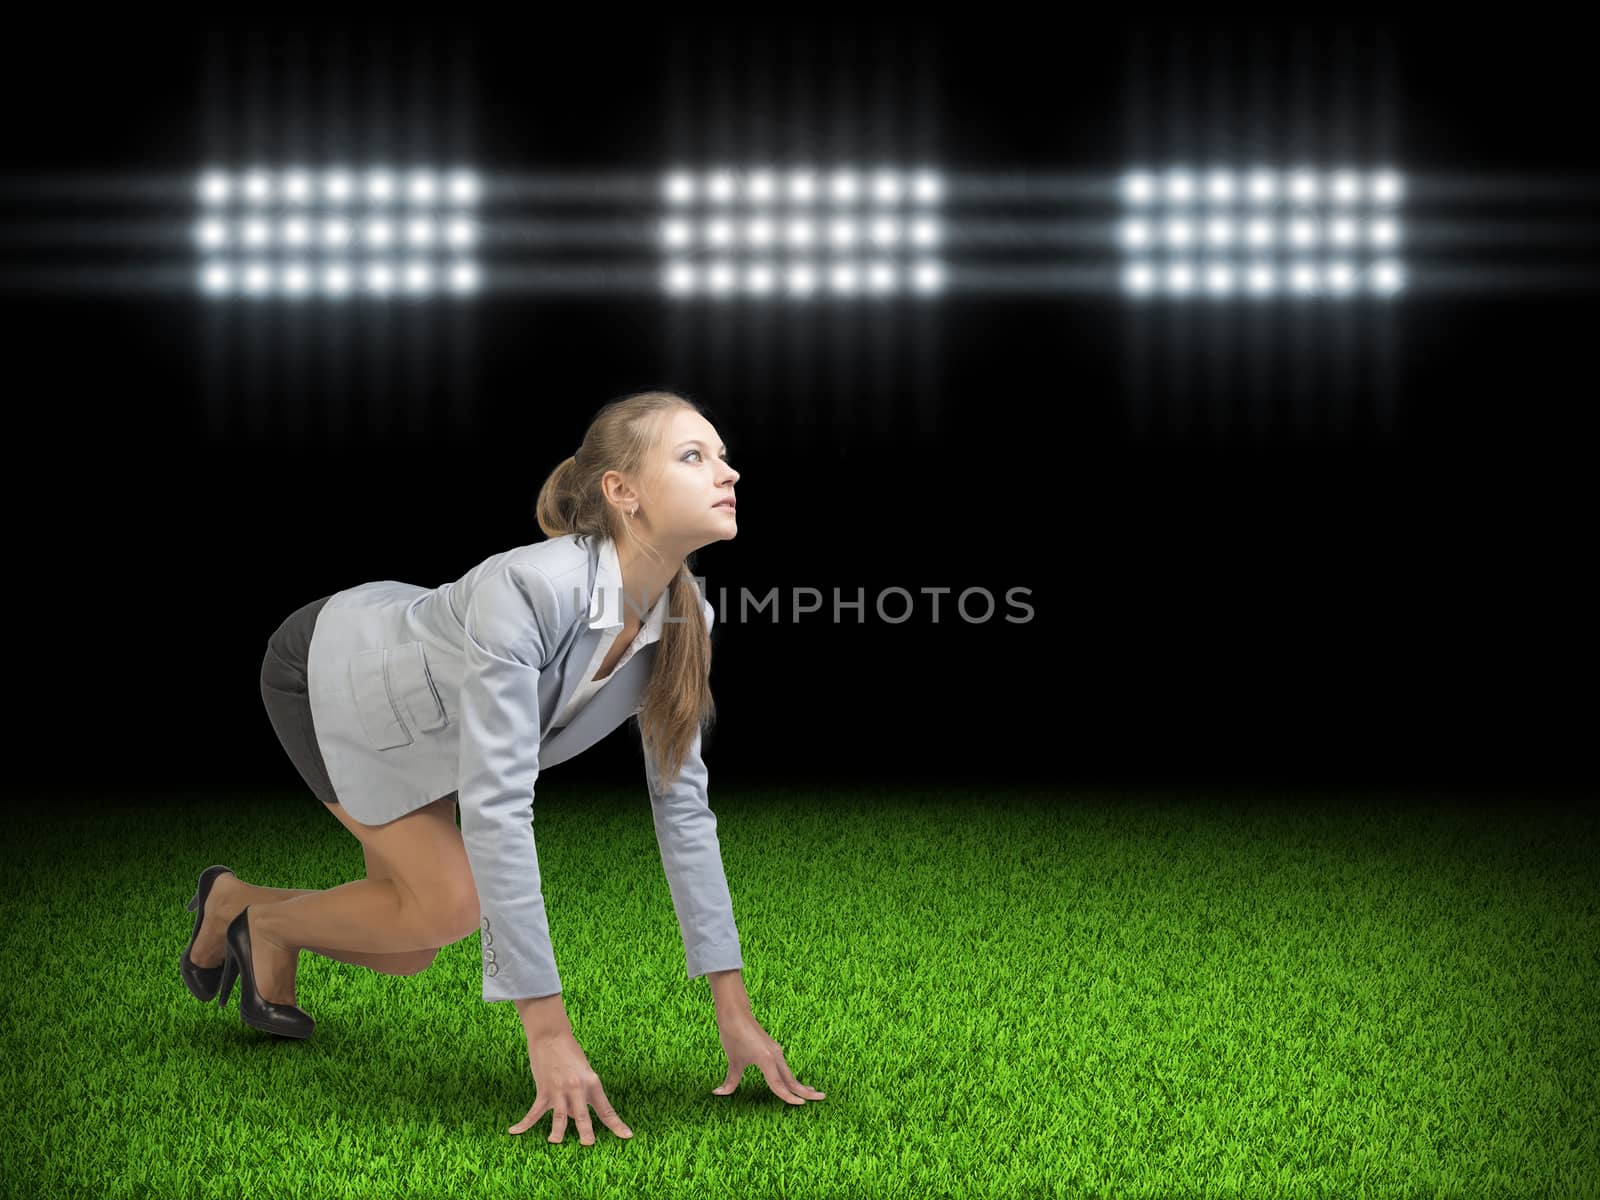 Businesswoman standing in running start pose at green grass court illuminated by spotlights, looking ahead